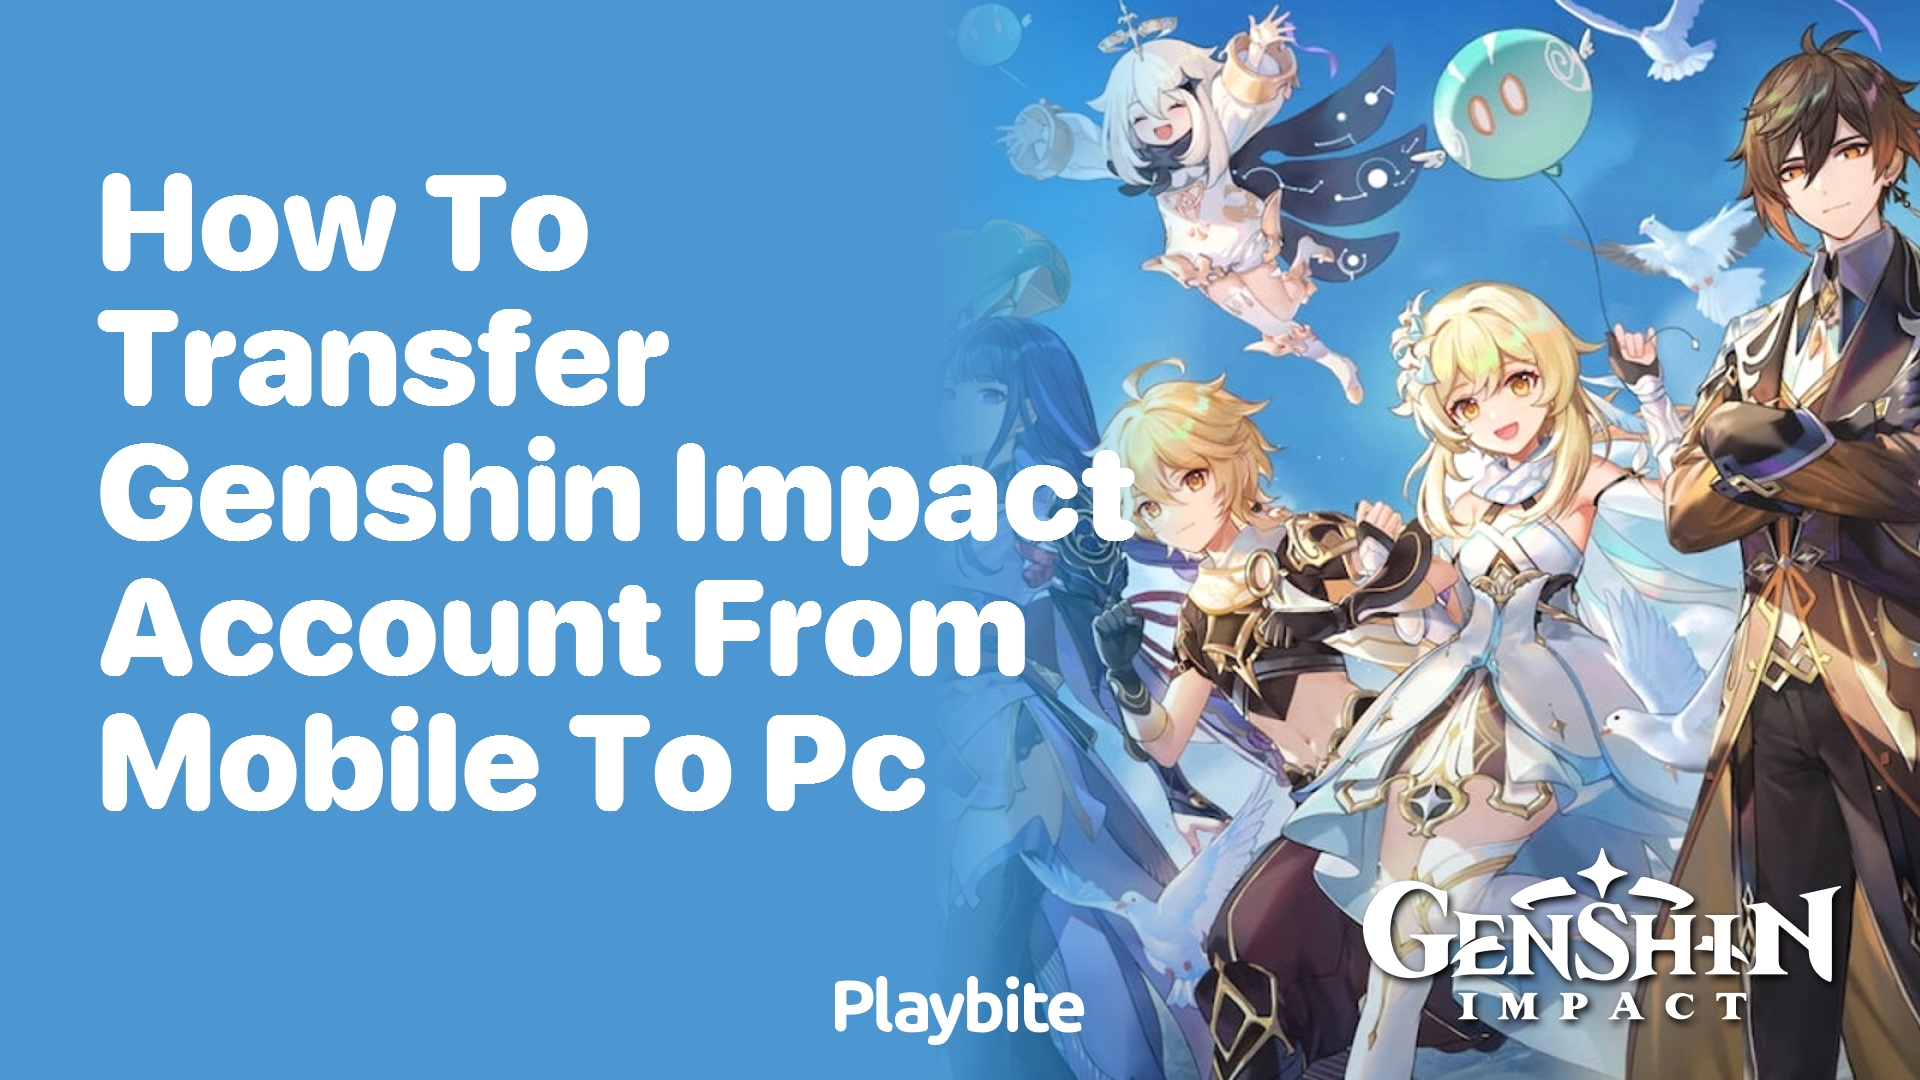 Is Genshin Impact Cross Platform?: A Guide to Enjoy Teyvat with